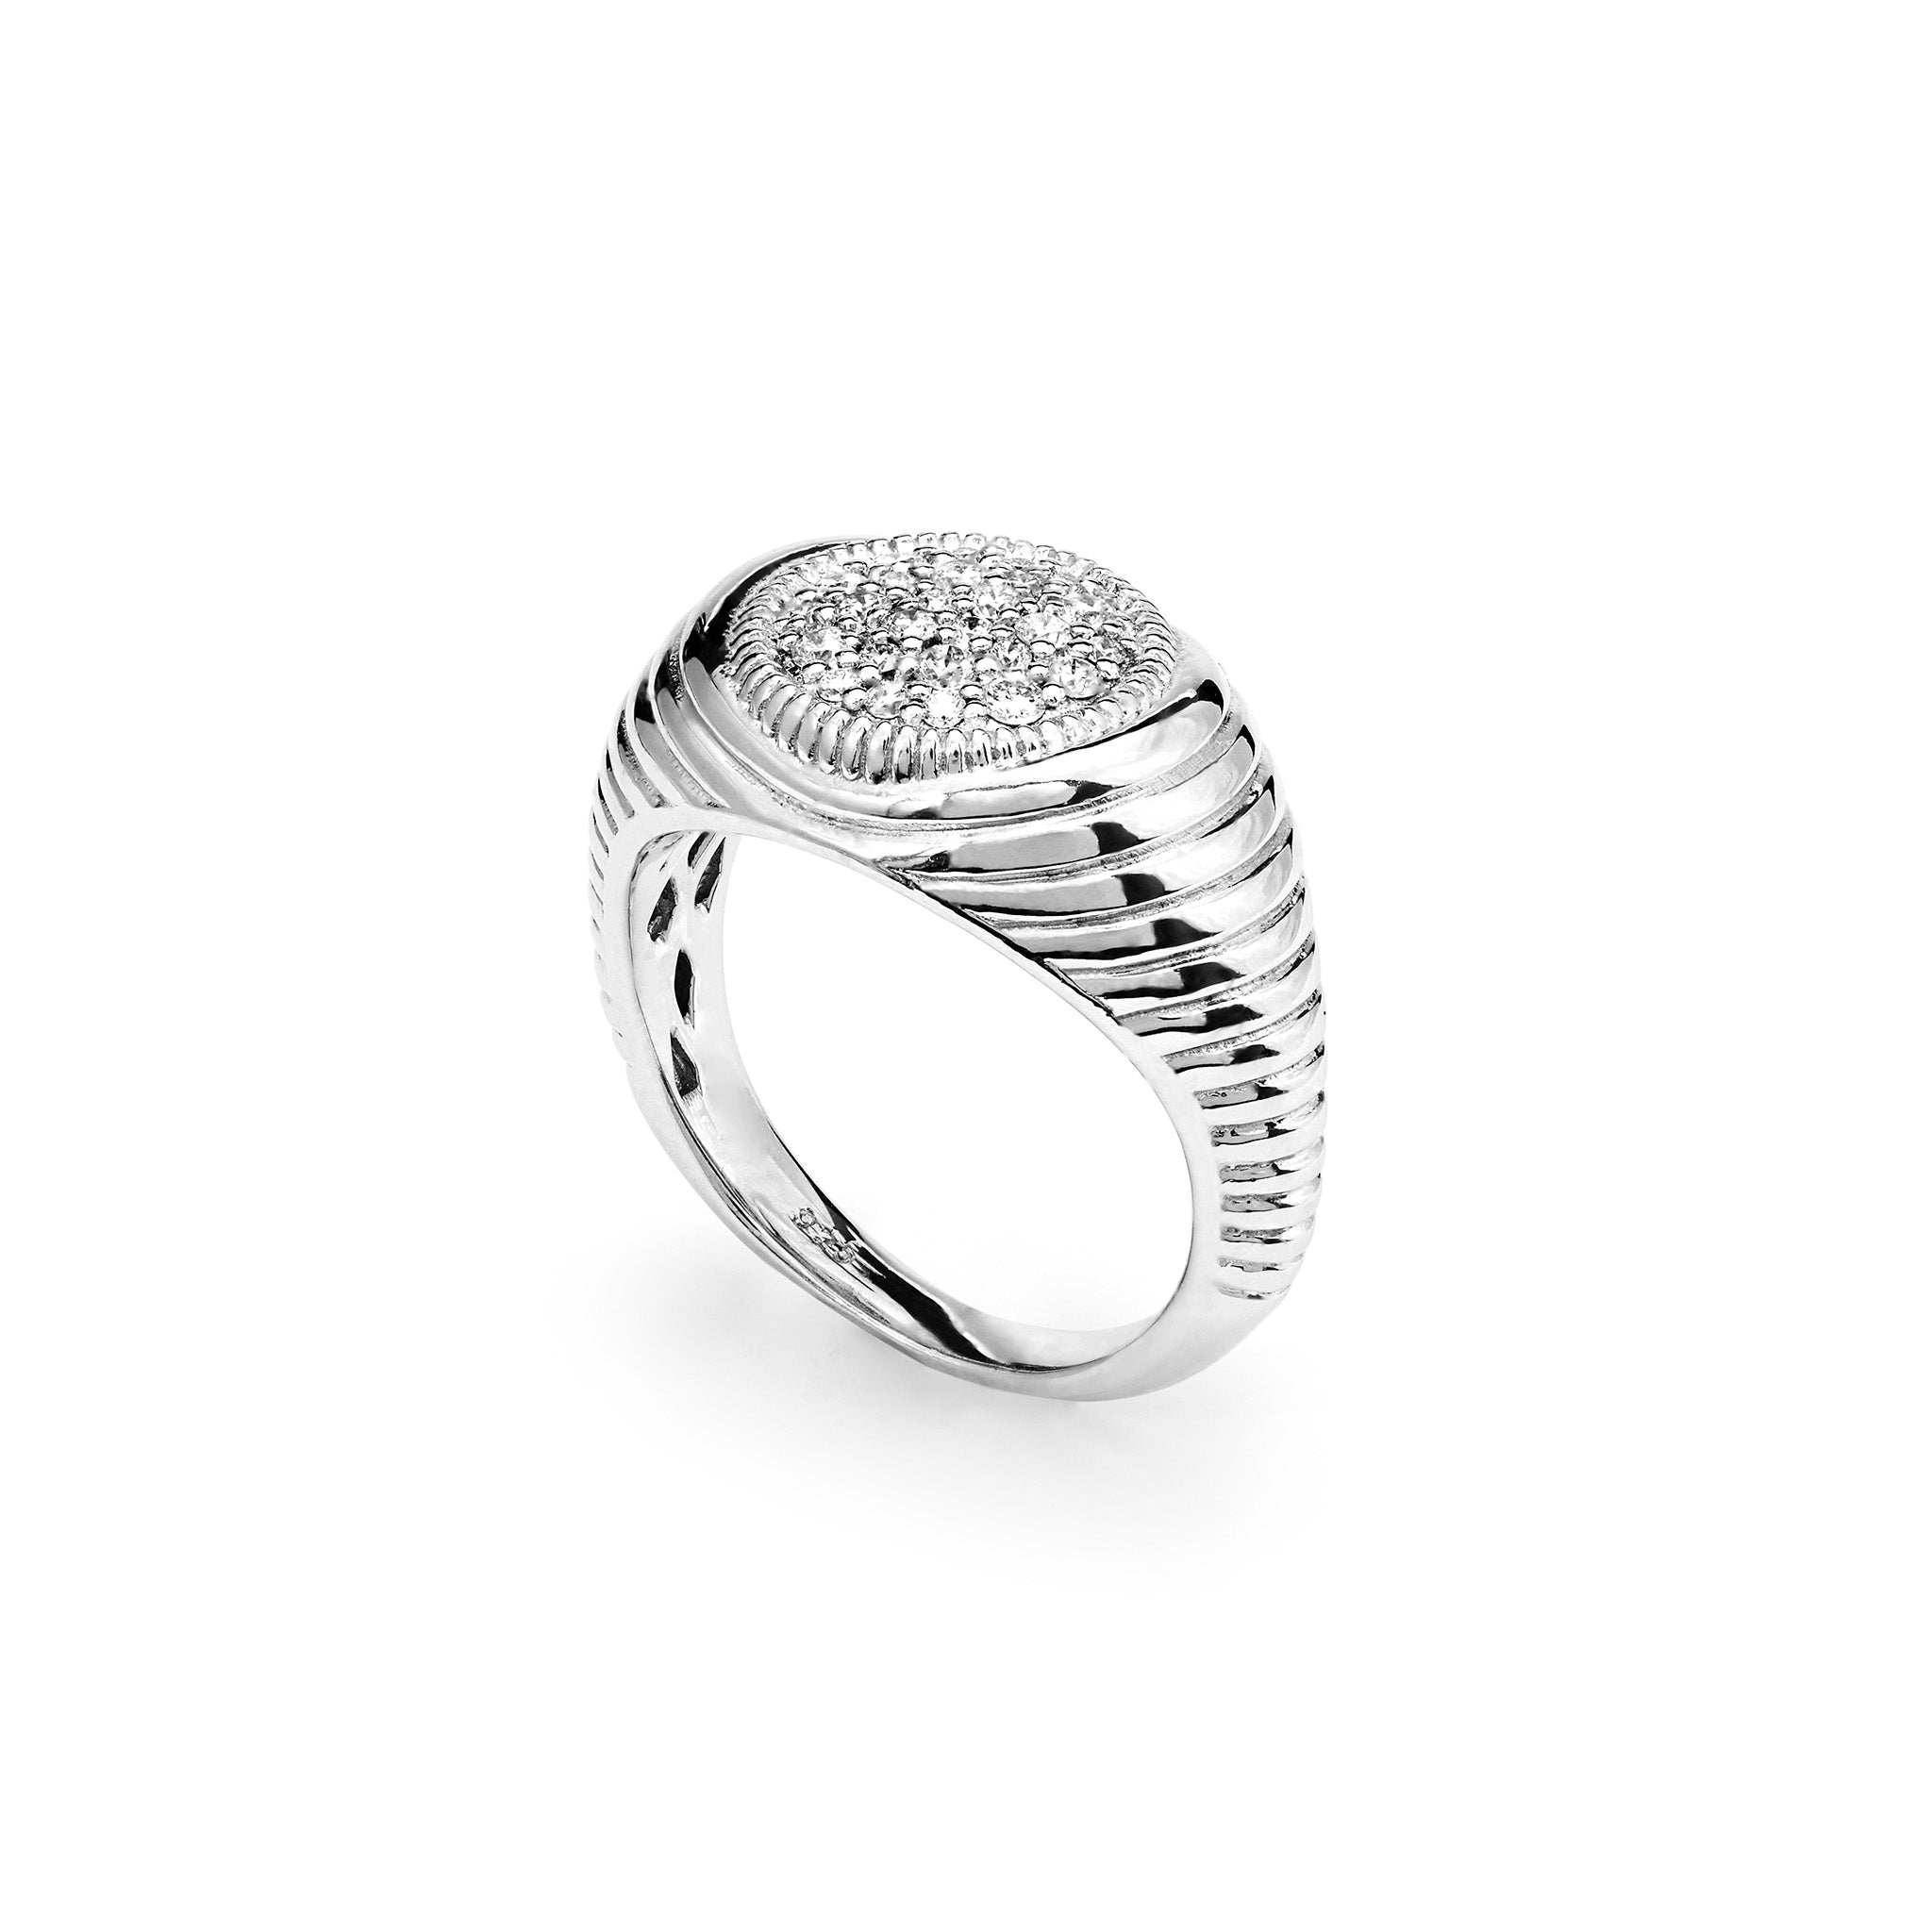 Max Signet Ring with Diamonds